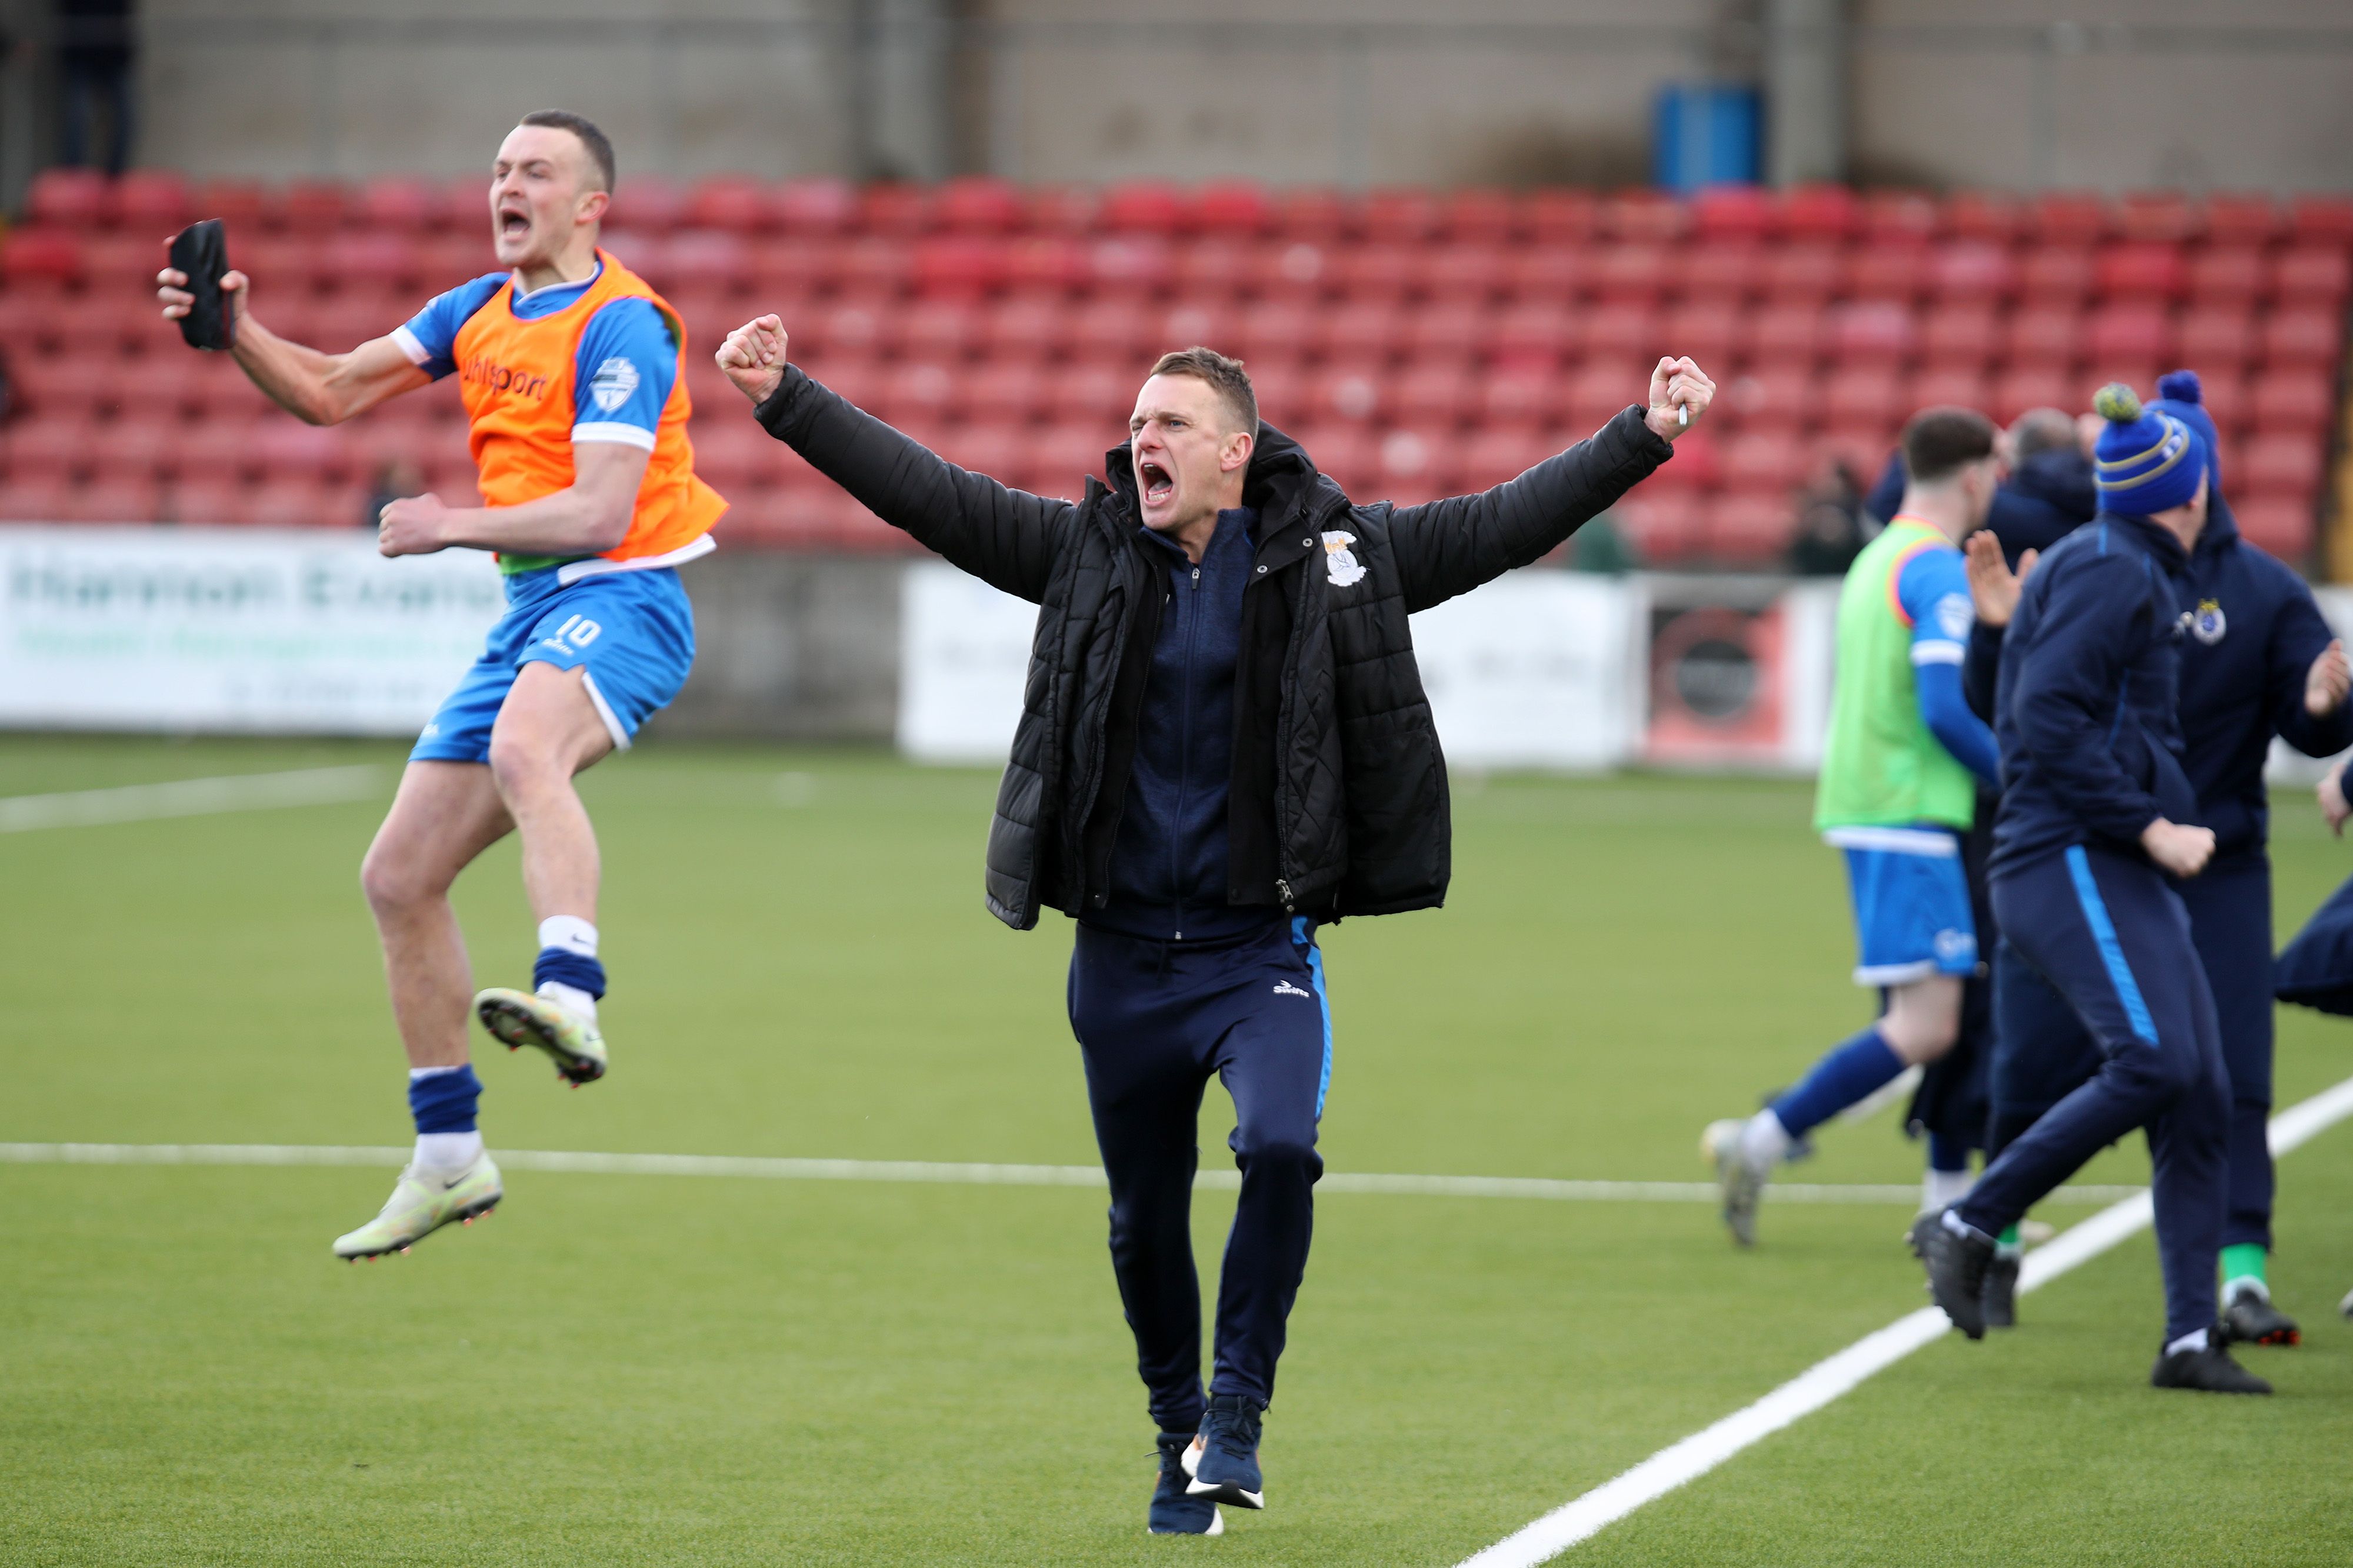 Dean Shiels celebrates as Joseph Moore scores in the dying seconds of the game to defeat Cliftonville 2-1